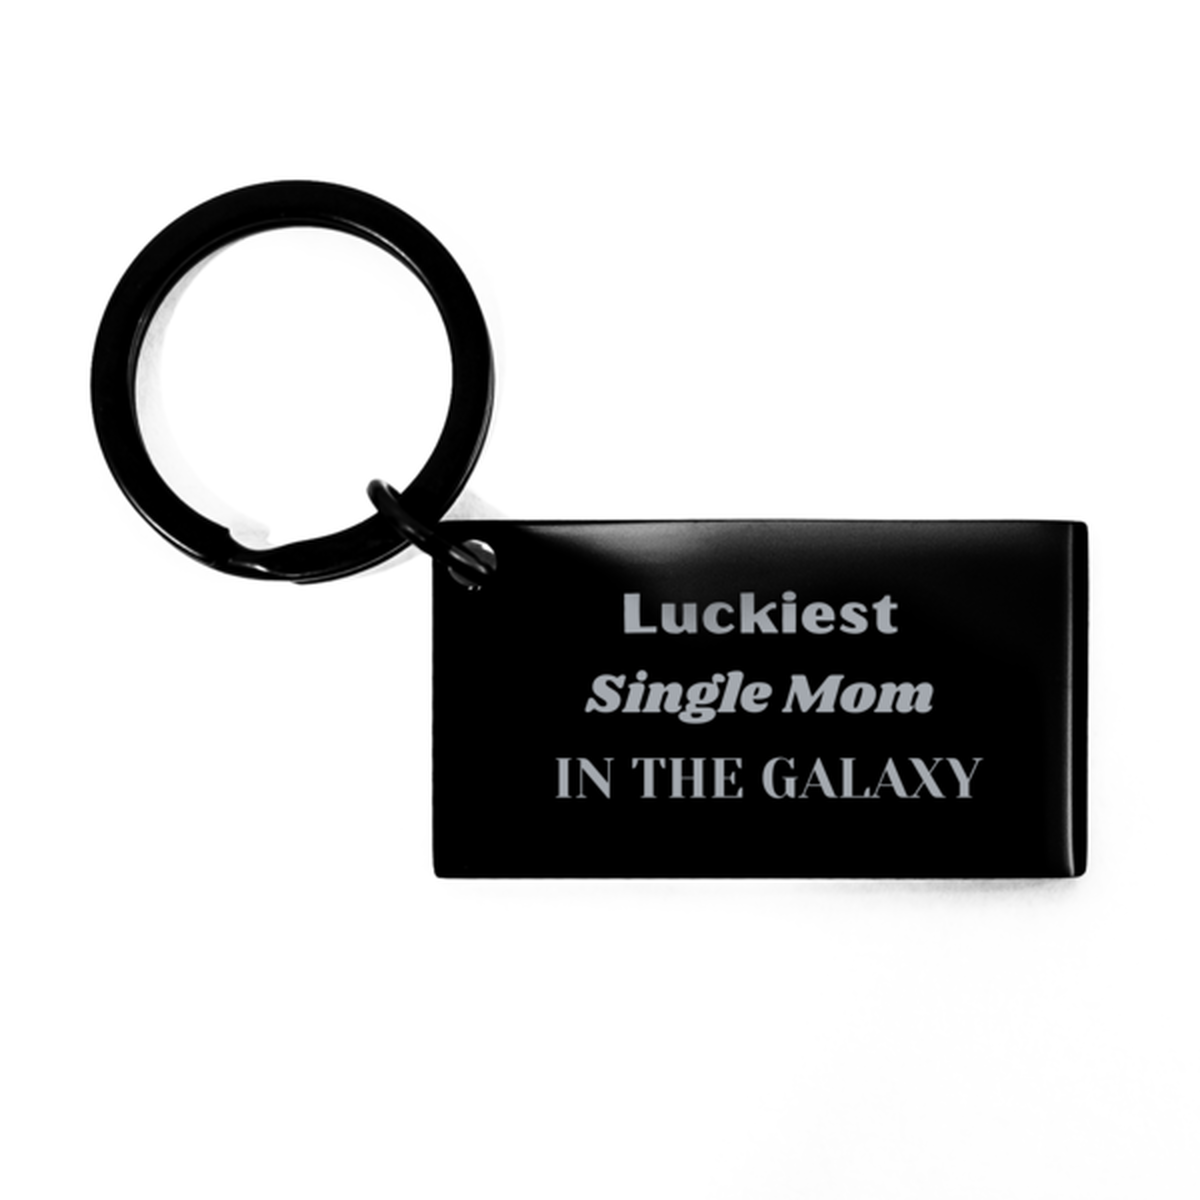 Luckiest Single Mom in the Galaxy, To My Single Mom Engraved Gifts, Christmas Single Mom Keychain Gifts, X-mas Birthday Unique Gifts For Single Mom Men Women